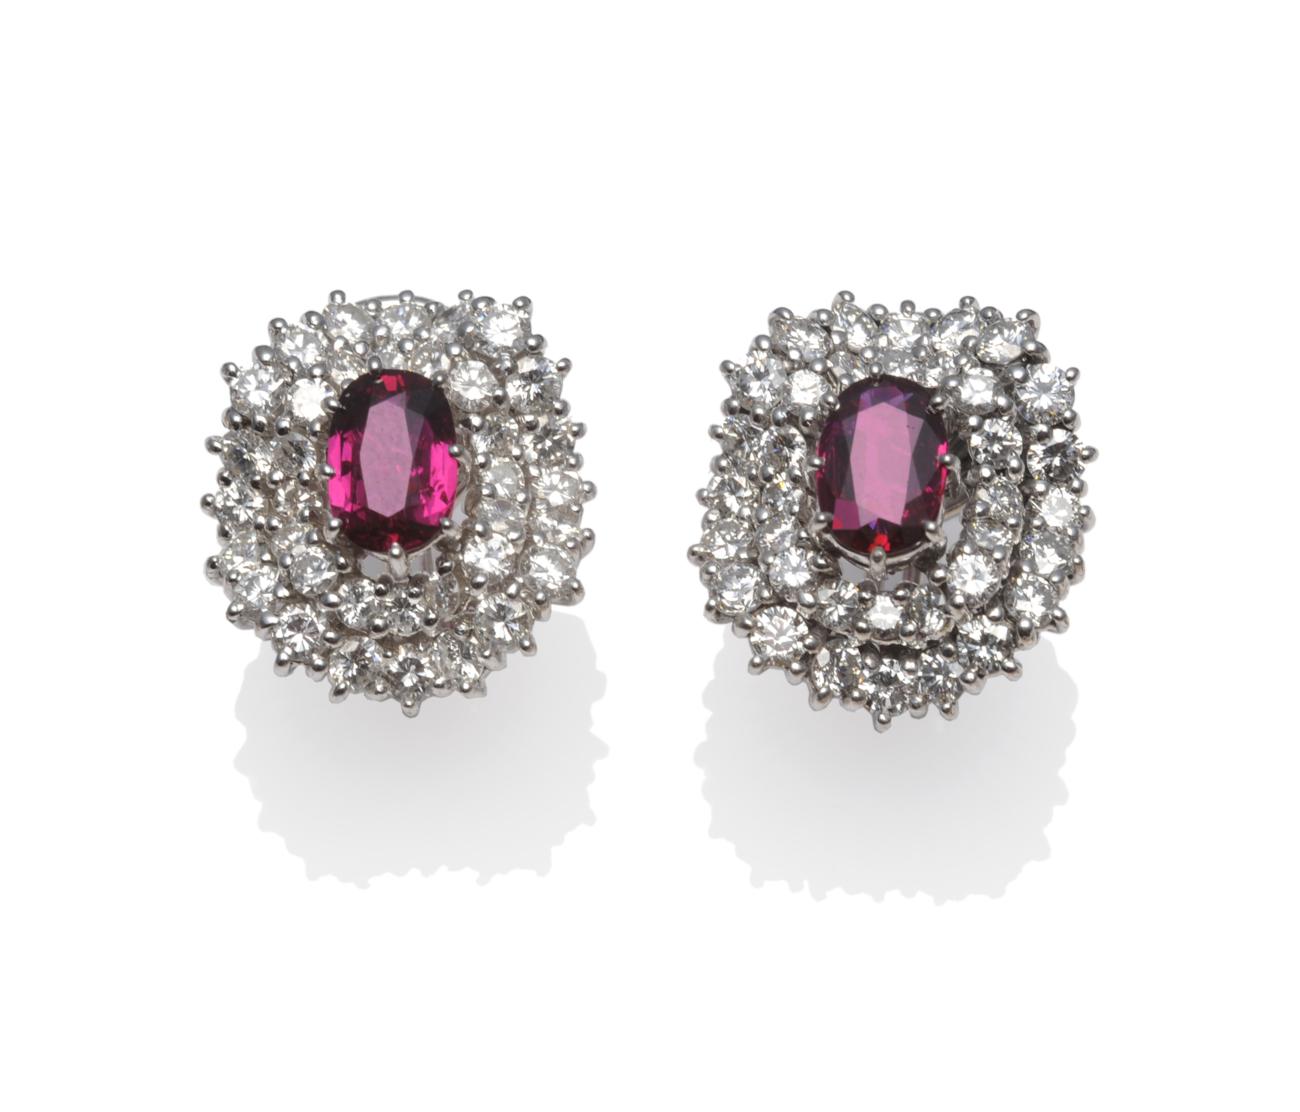 A Pair of Ruby and Diamond Cluster Earrings, an oval cut ruby centres two undulating borders set